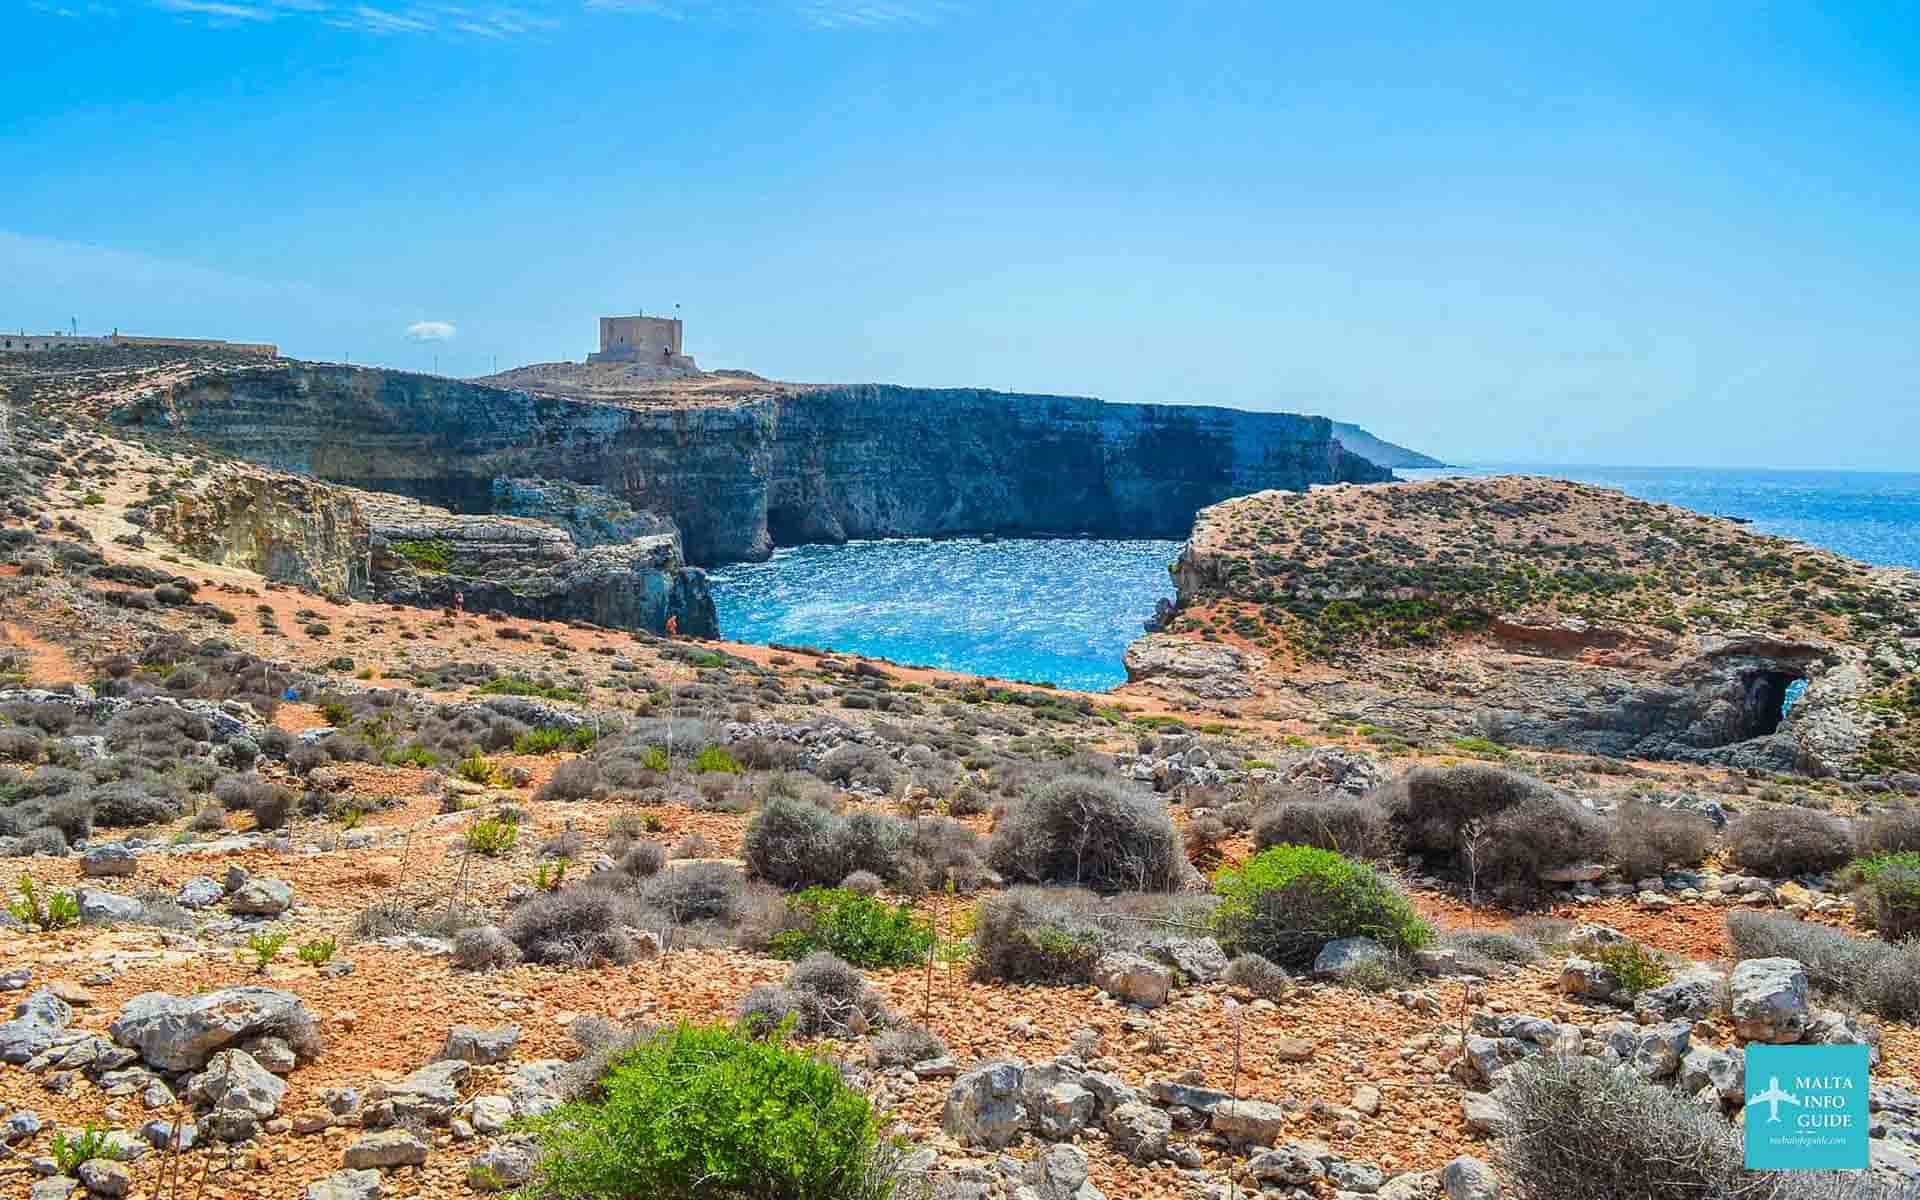 Santa Maria Tower on the island of Comino in the distance.